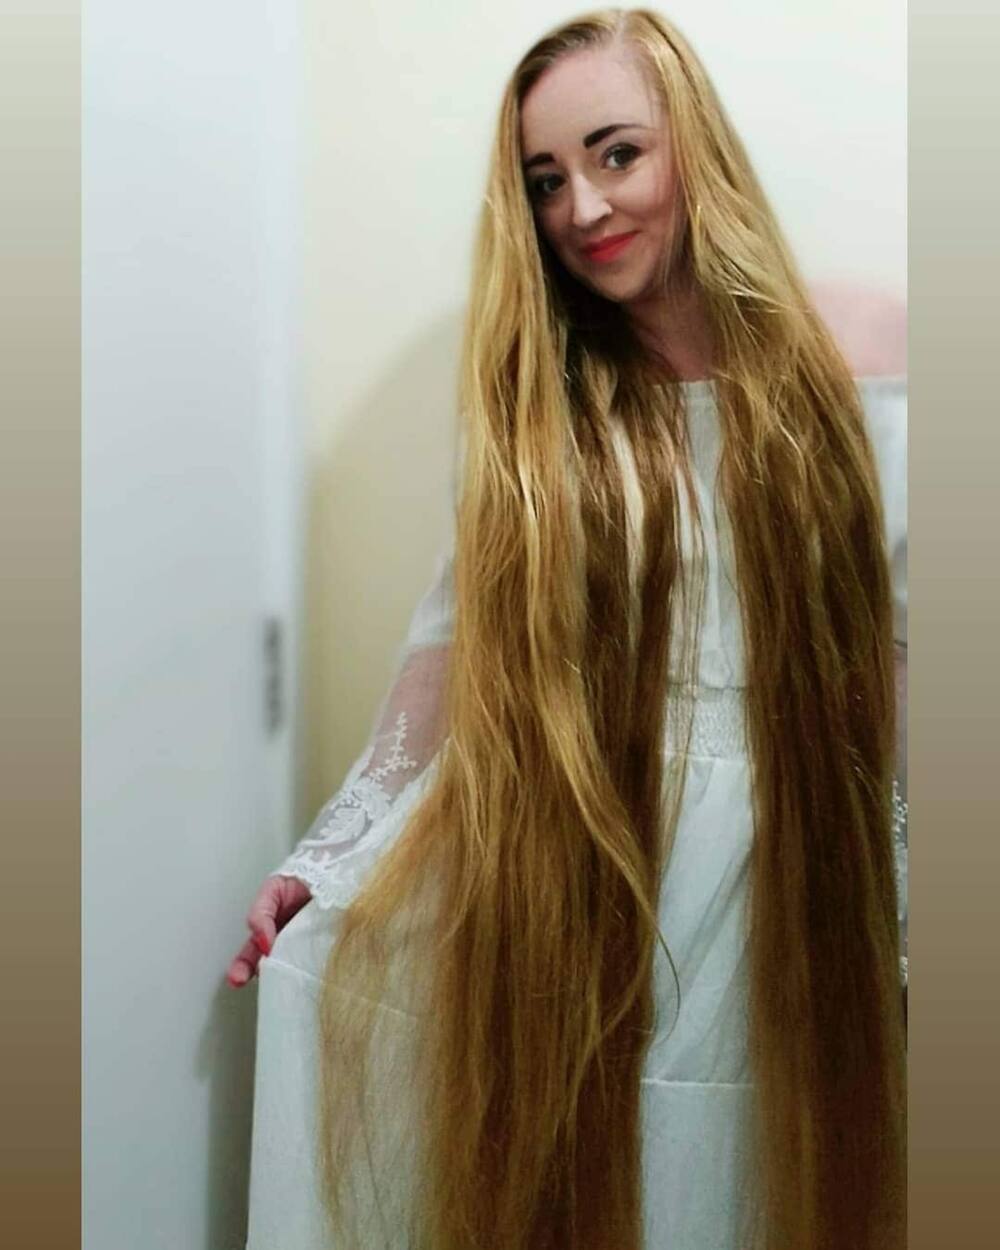 Meet real-life Rapunzel who hasn’t been to the hairdressers in 5 years (photos)